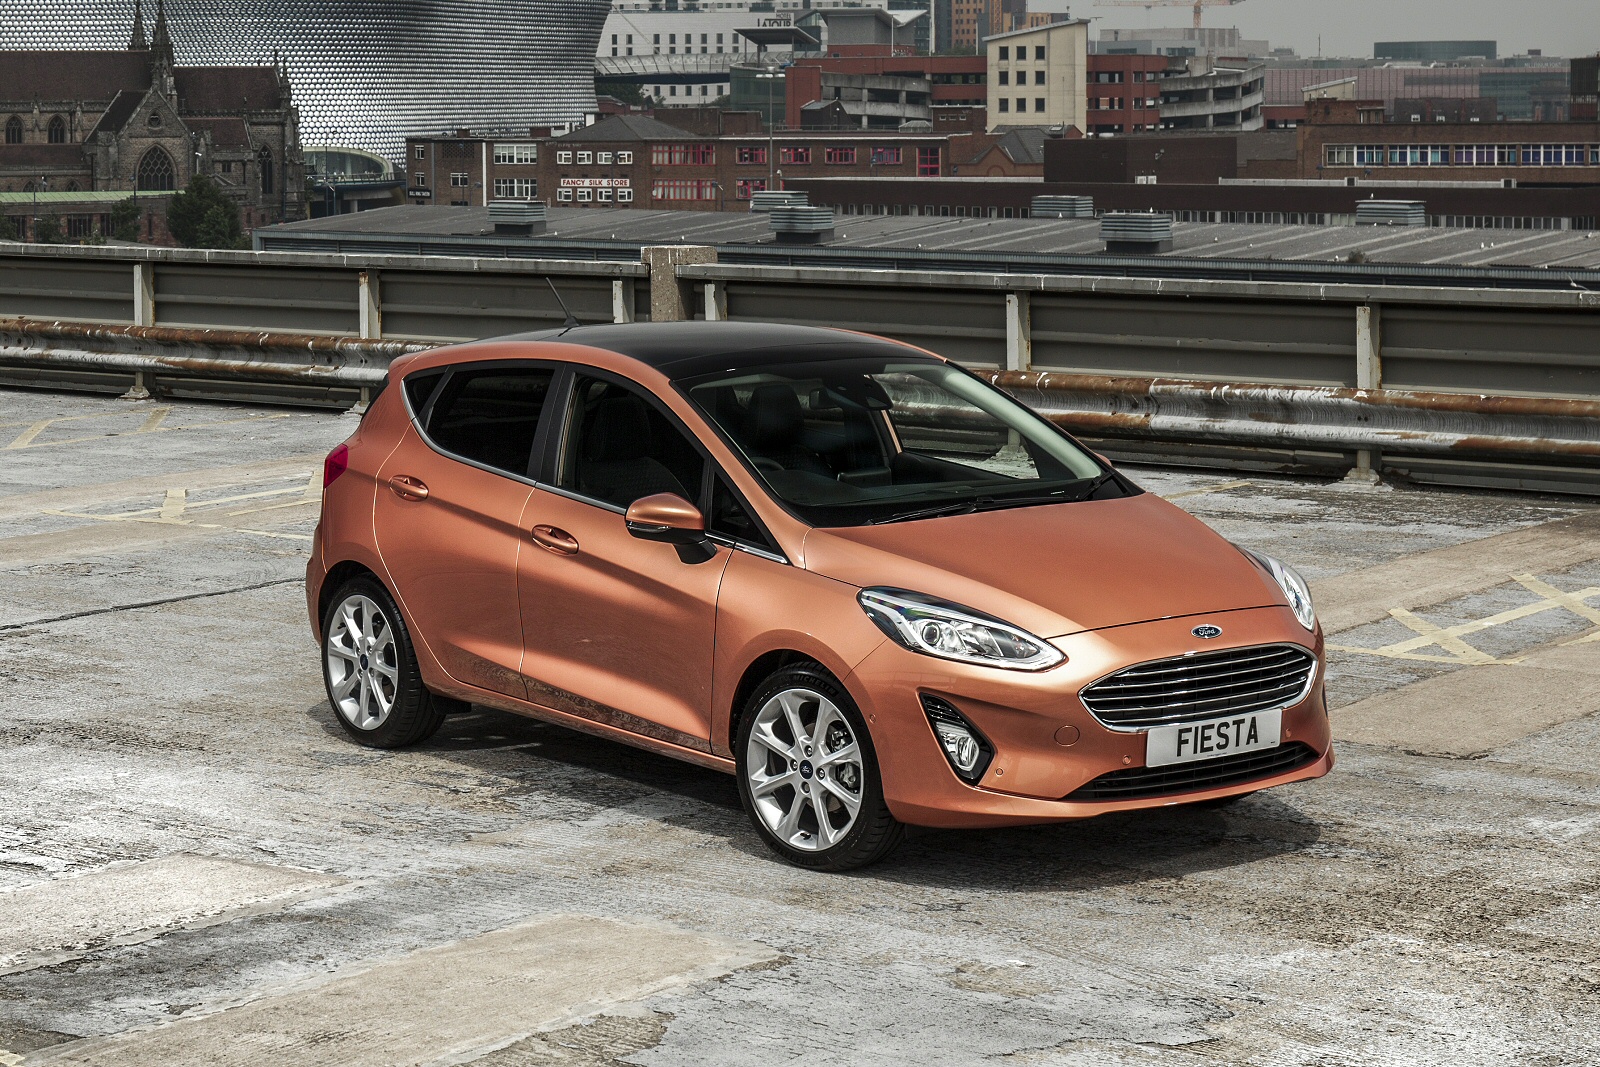 2019 Ford Fiesta | Fuel Efficient and Personalized Design | Ford.com